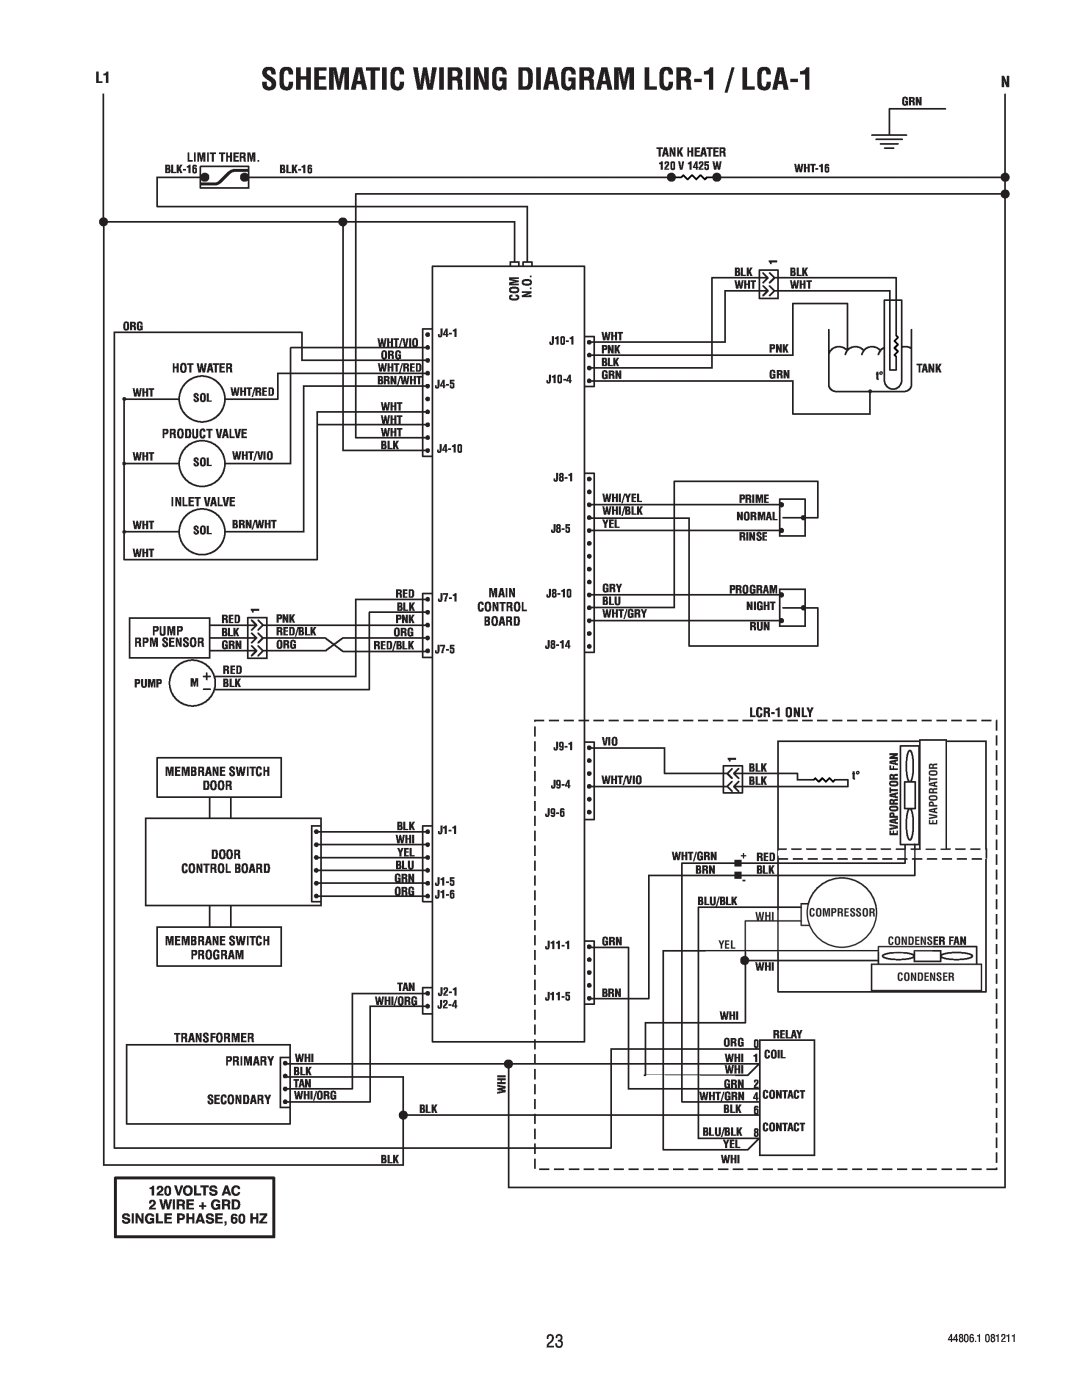 Bunn SCHEMATIC WIRING DIAGRAM LCR-1 / LCA-1, LCR-1 ONLY, Volts Ac, Wire + Grd, SINGLE PHASE, 60 HZ, Limit Therm, Door 